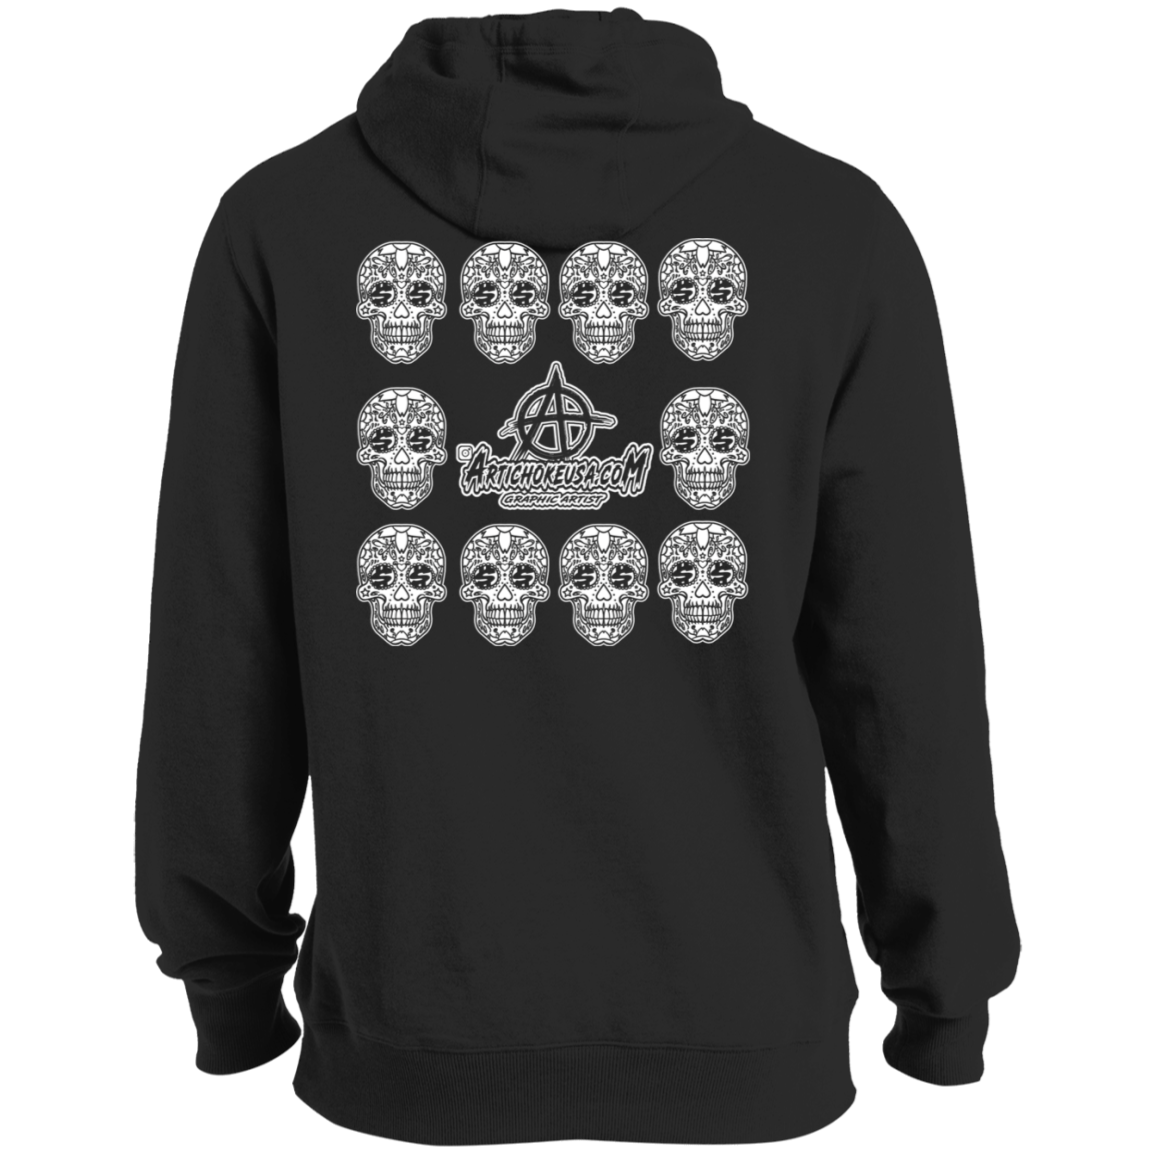 ArtichokeUSA Custom Design. You Win Some, You Lose Some, But You Get Paid For All. Pullover Hoodie